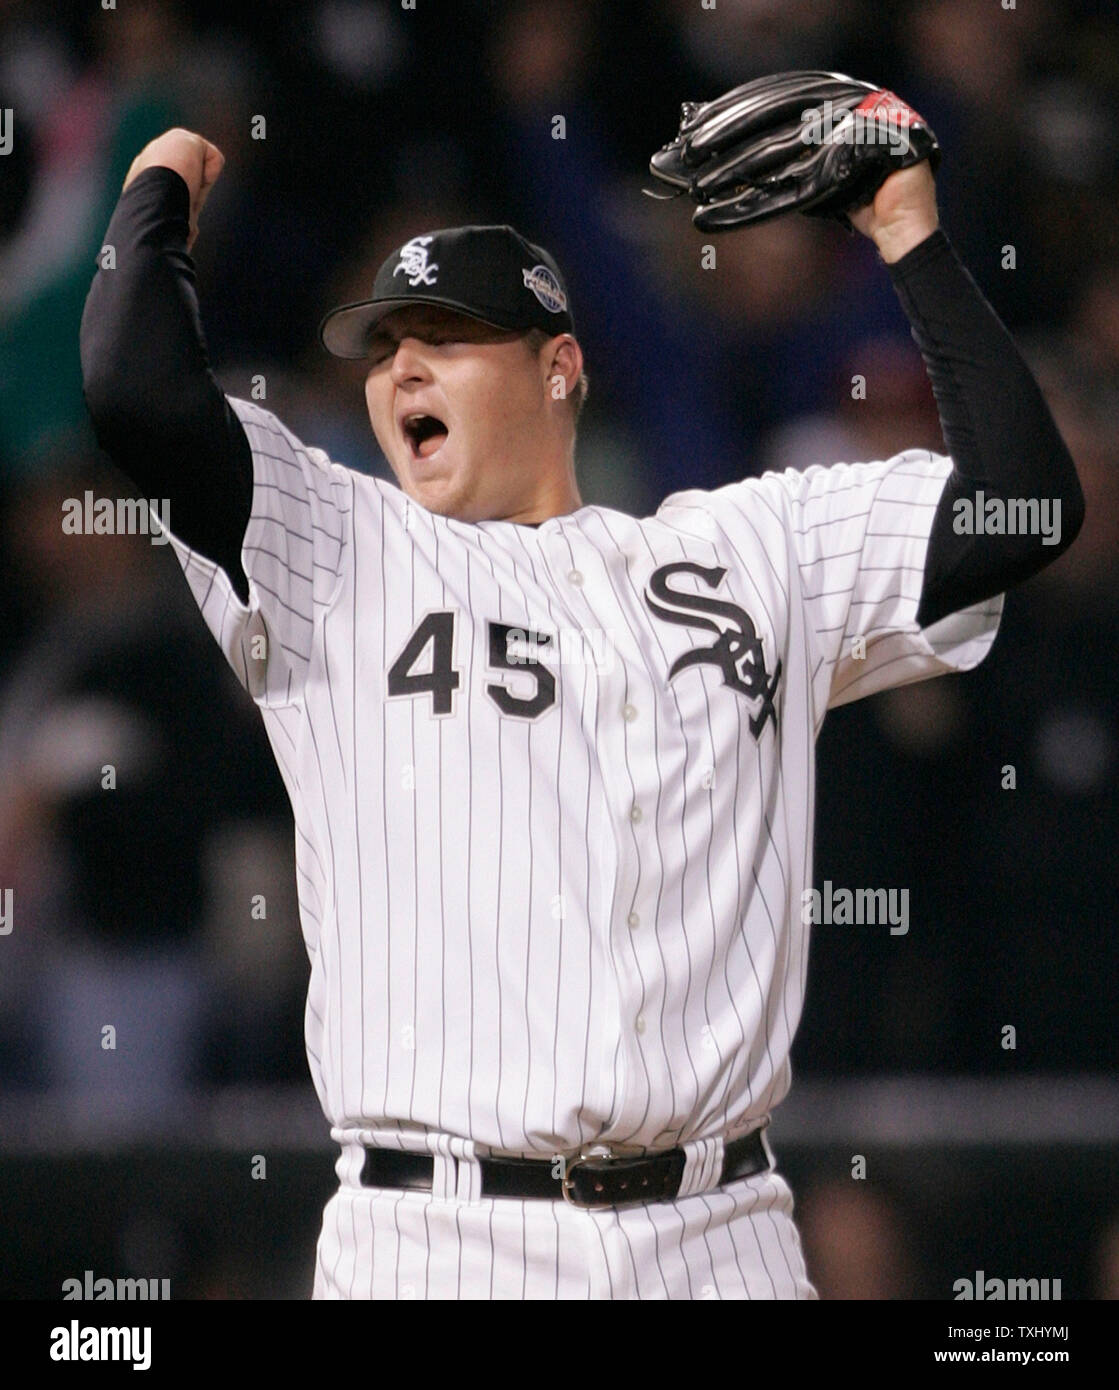 Chicago White Sox closer Bobby Jenks reacts after striking out Adam Everett  in the ninth inning getting the save in game 1 of the World Series at U. S.  Cellular Field, October